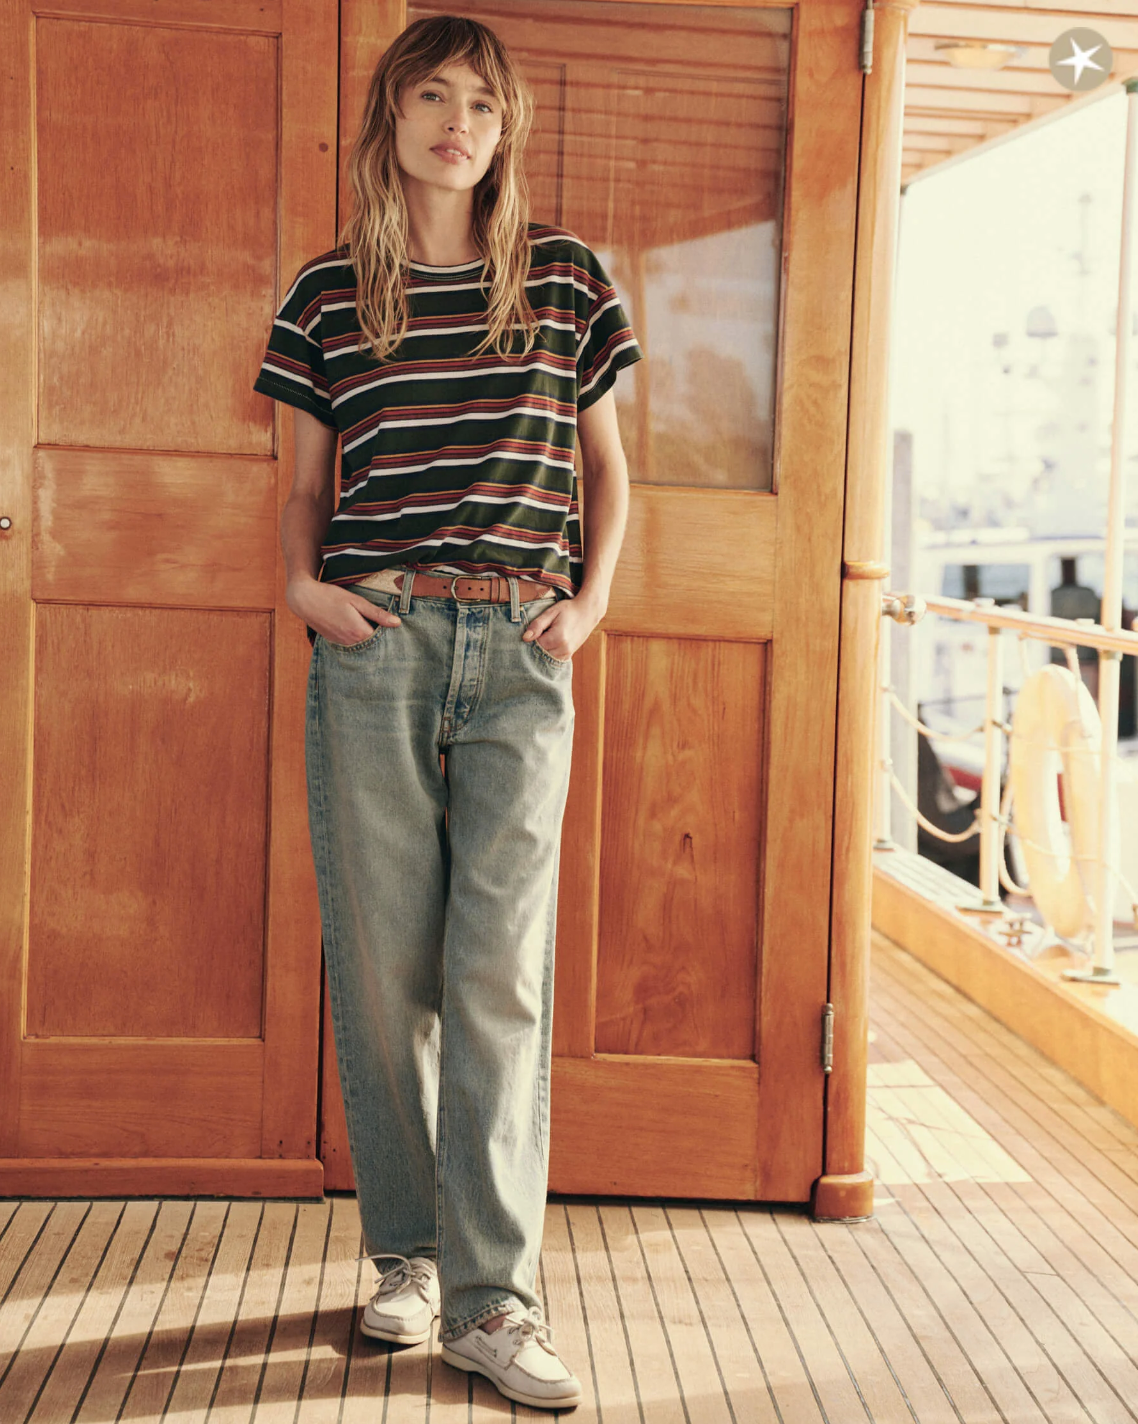 A person with long hair stands on a wooden deck in front of a wooden door. They are wearing The Boxy Crew by The Great Inc., high-waisted jeans, and sneakers, with hands in pockets. Sunlight filters through, casting a warm glow on the scene. The vintage tee adds to the charm of this handcrafted locally scene.